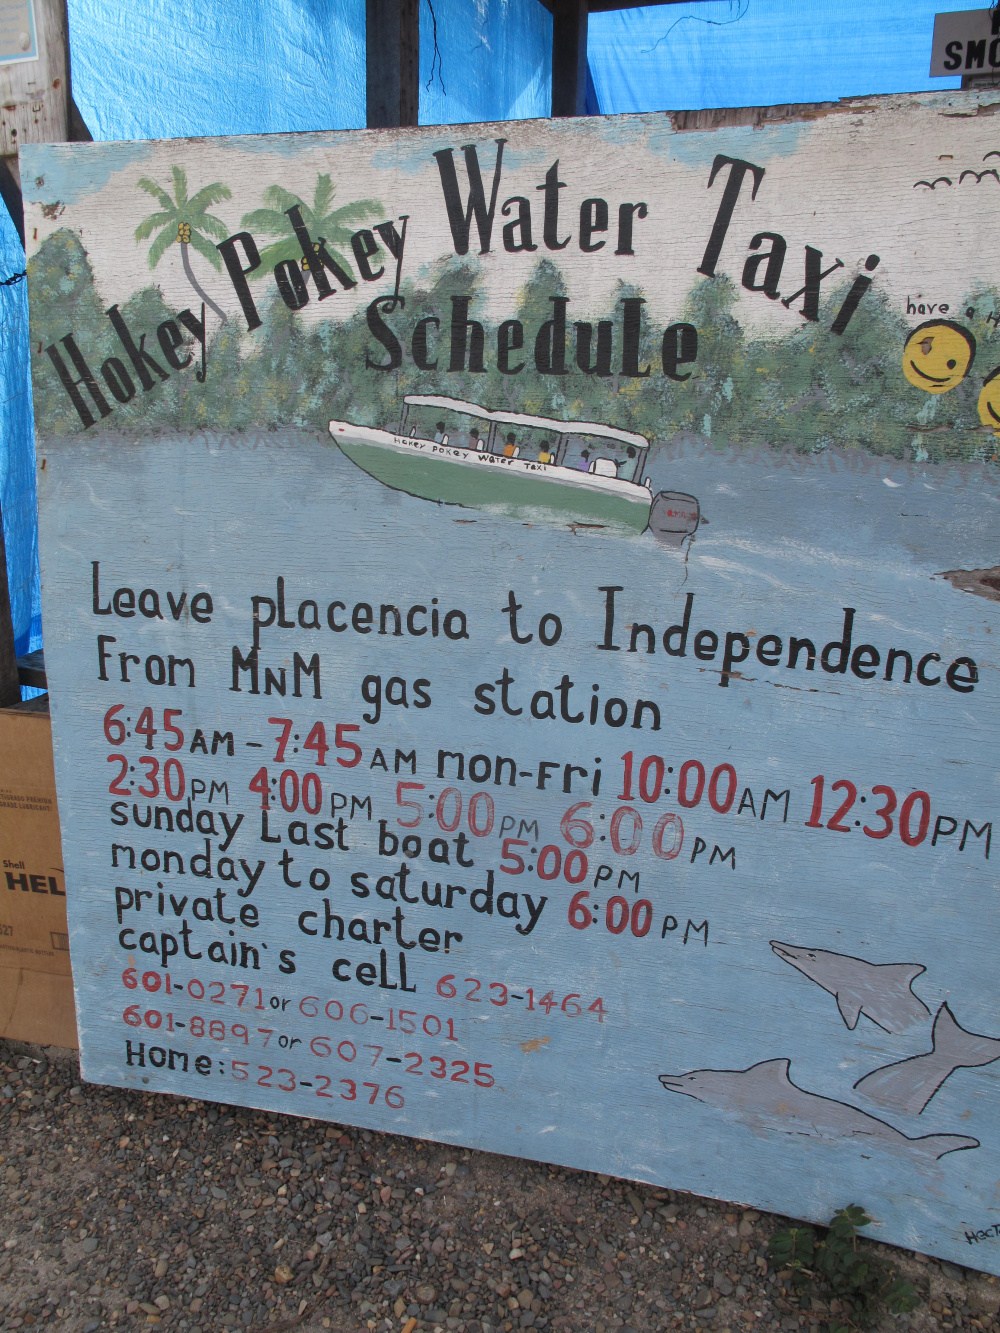 hokey-pokey-water-taxi-sign-and-schedule